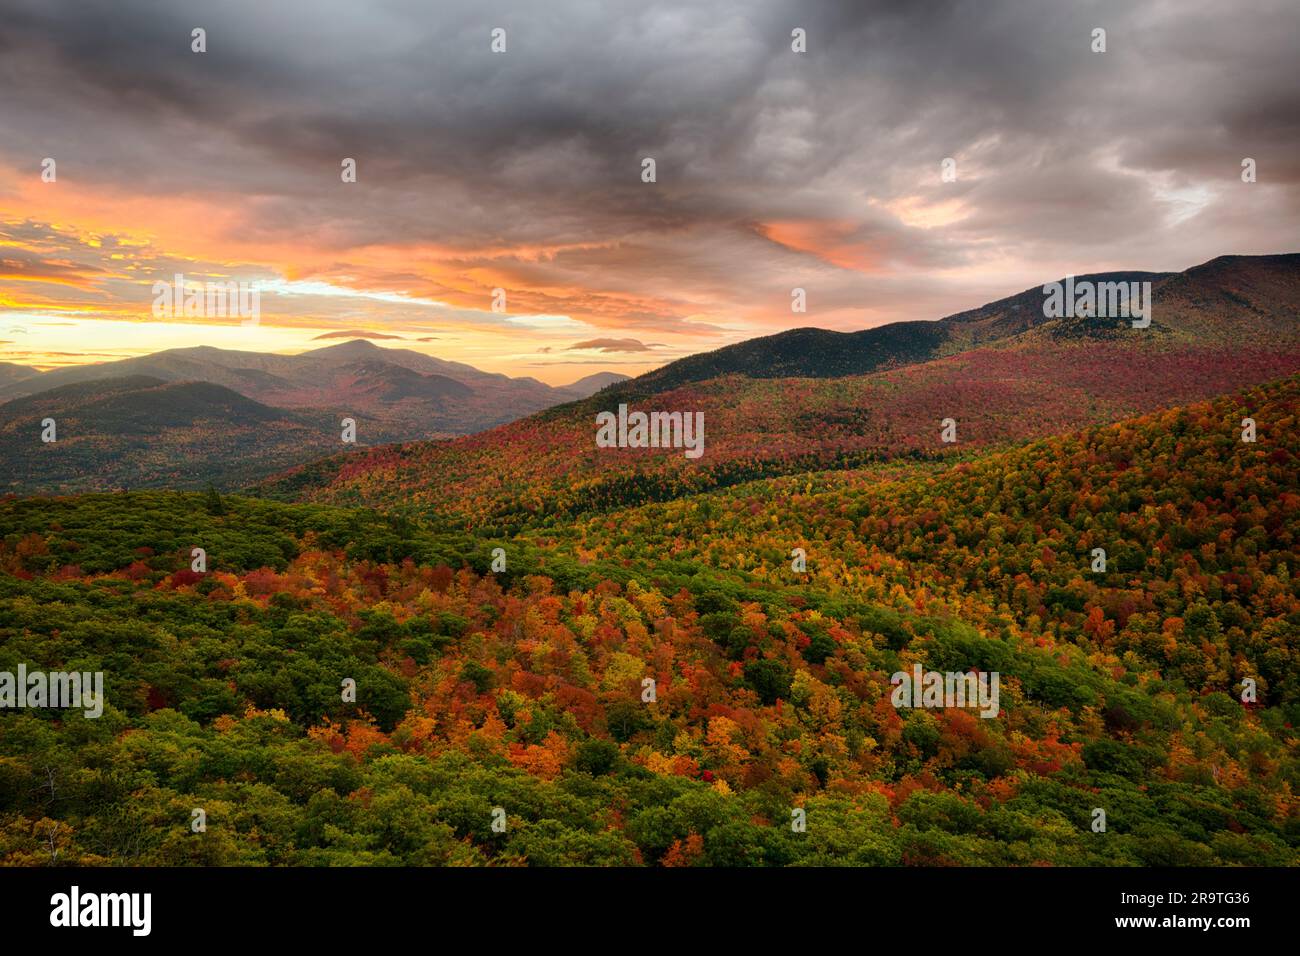 Landscape from Owls Head in autumn, Adirondack Mountains, New York, USA Stock Photo